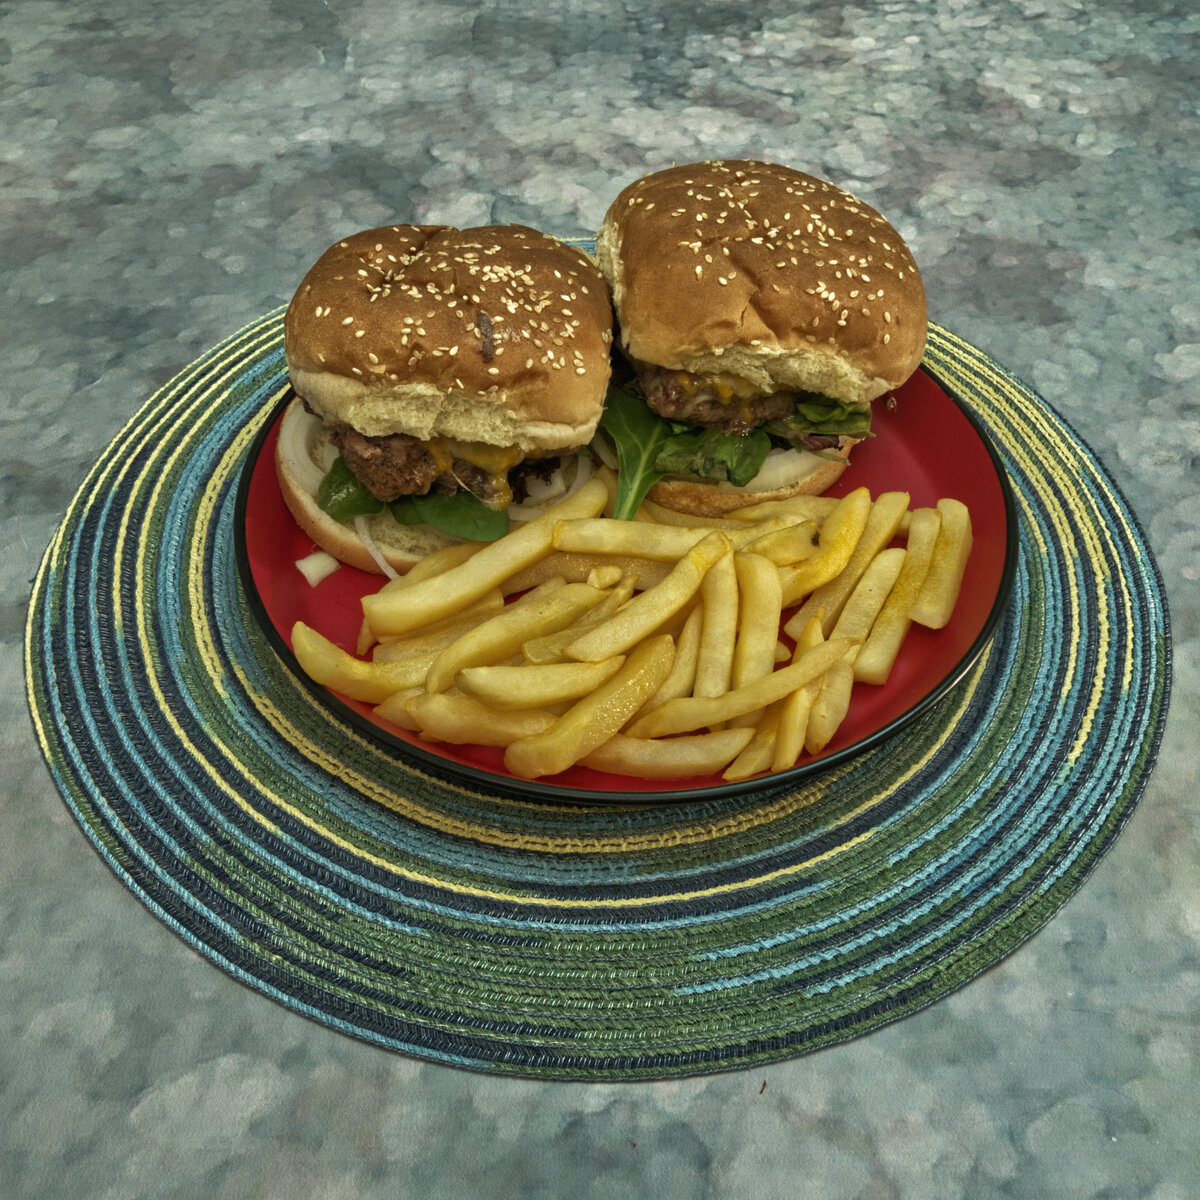 Lamb Cheeseburgers with French Fries